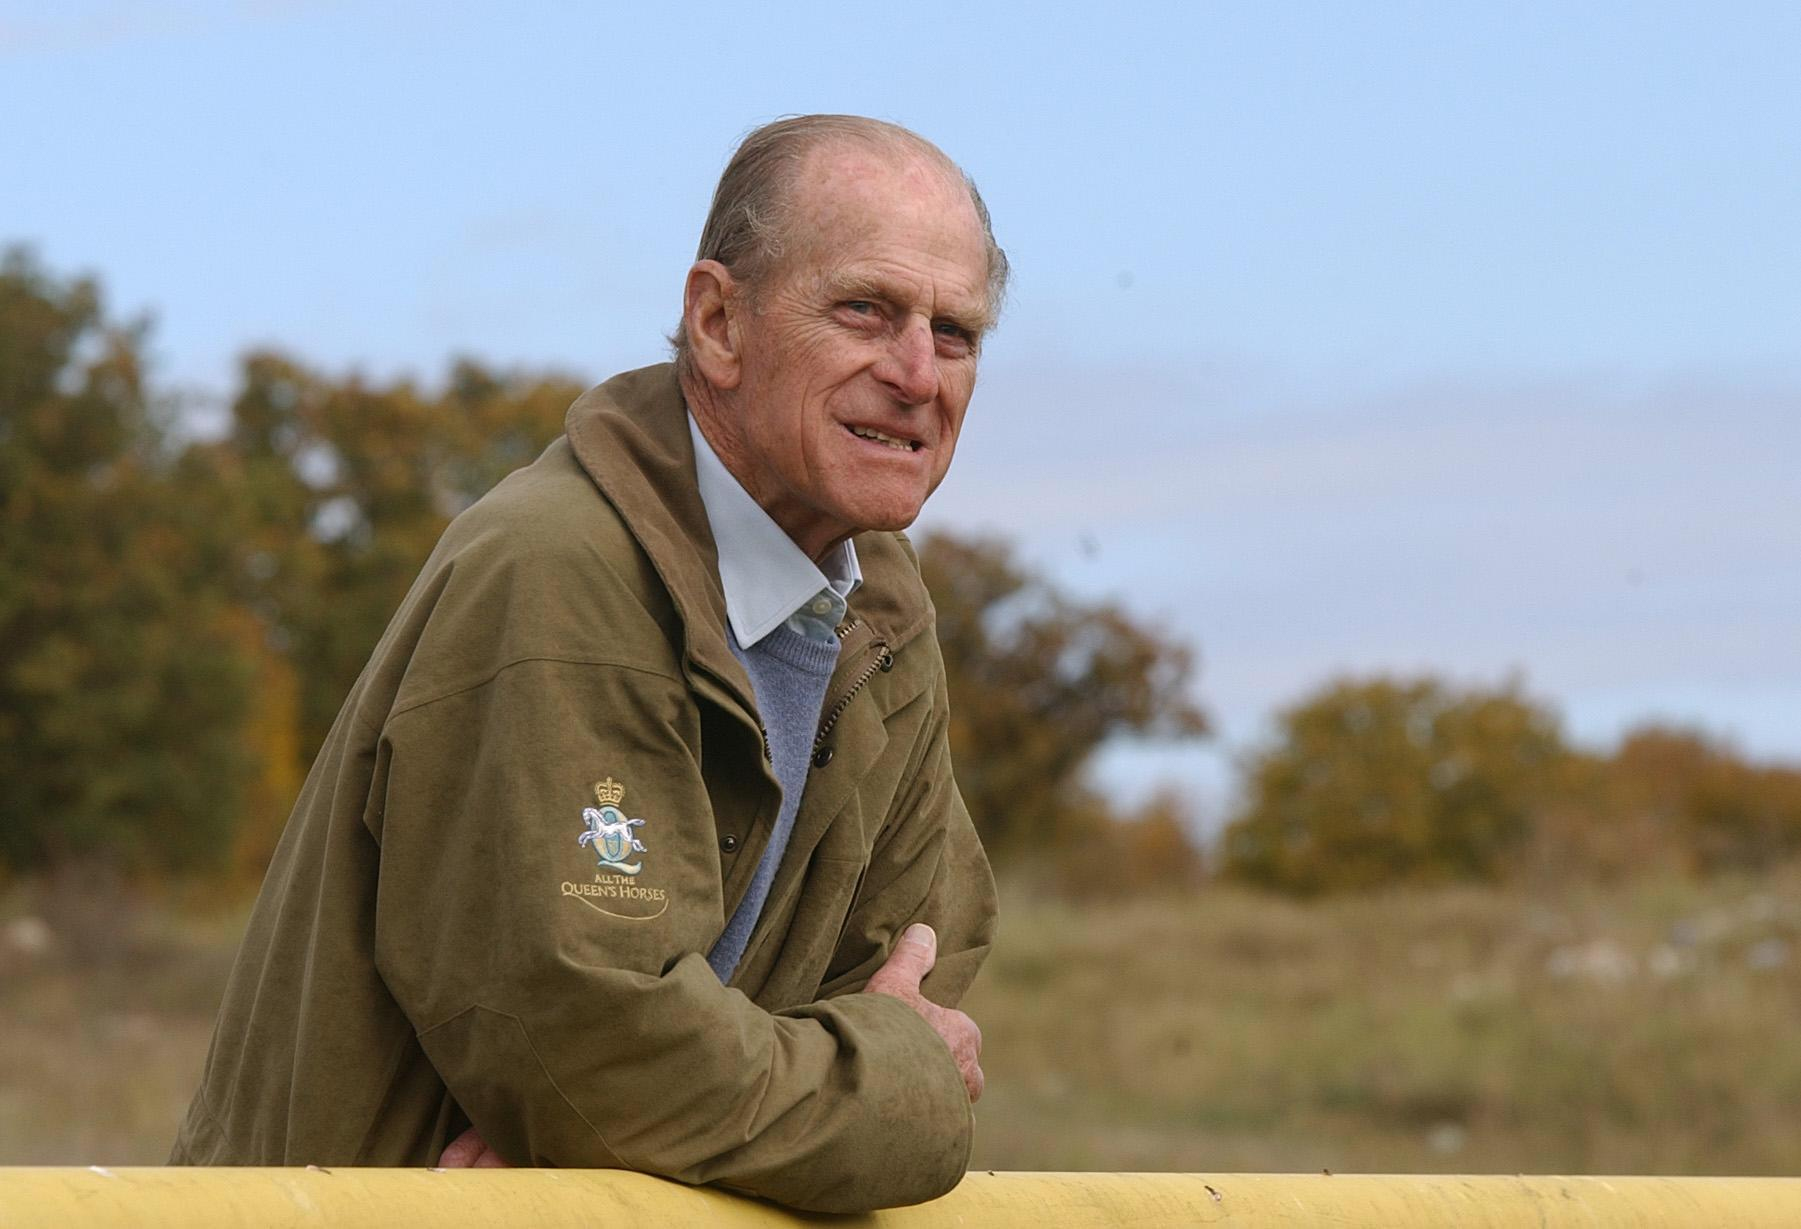 The Duke of Edinburgh died at Windsor Castle, at the age of 99